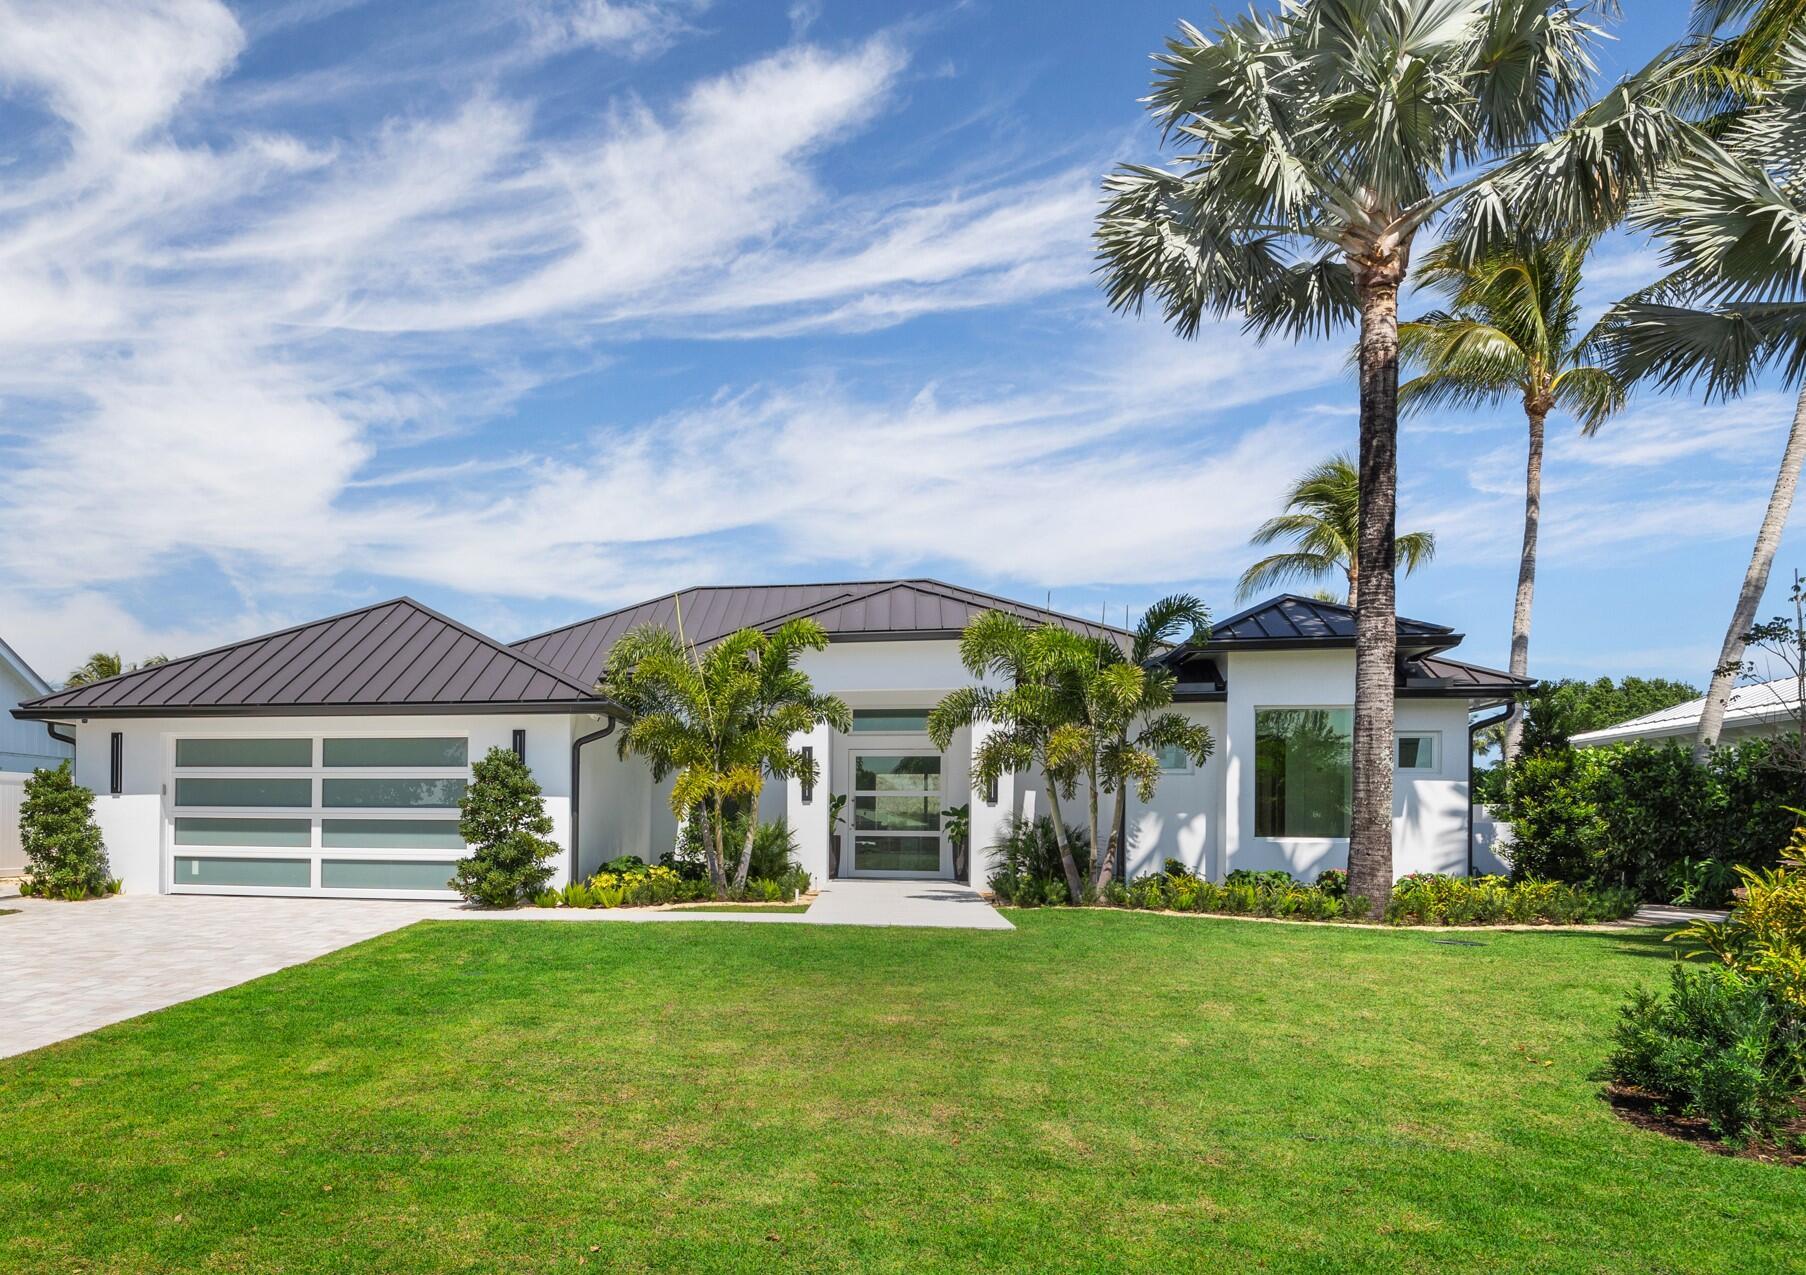 STUNNING Contemporary 2023 COMPLETE Renovation w HIGH END Features Expected only the Most Luxurious Homes. SEE DETAIL SHEET to Appreciate.  River Views to the Northeast.  85' Concrete Cap Seawall 2023. Dock 65' Synthetic Decking 2023. Roof 2022 Commercial Grade Standing Seam Metal. SIW Impact Windows + Doors.  Front Entry Door is a Pivoting w Glass.  Generator 26KW w Buried Propane Tank. Resort Style Pool/Spa Gem Finish Jandy Syst w BOTH Gas+Elec Heat.  Outdoor Kitchen.  Landscape Arch Features St. Augustine Turf and Synthetic Turf Poolside.  Custom Fencing + Gate.  Interior Impresses with SOLID WALNUT 8' Doors w Frosted Glass Inserts + Satin Nichol Emtek Hdwe. Arch Design Ridgelit 5/8'' Reveal Over Poplar Base.   Italian Porcelain Tile Supergres 30''x 60''. Italian  Cabinetry + Closet Sy Fireplace features Quartzite Large Panels w/Dimplex Vapor System. Miele SS Appliances. High Grade Quartzite Glass Counter + Vanity Tops; ALL 3 Baths are Spa grade w Wall to W Italian Porcelain.  Walk In Showers w Linear Shower Drains.  Toto Wall Flush Toilets.  Lit Custom Mirrors. Design Plumbing Features.  State of Art Audio Visual System including Vantage Lighting System and Sonance Invisible Series, Cad 6 Flat Screen Mounts.  Recessed Square Inset Bevel and Wall Wash Ceiling Light Units... SEE DETAIL SHEET for MORE Info